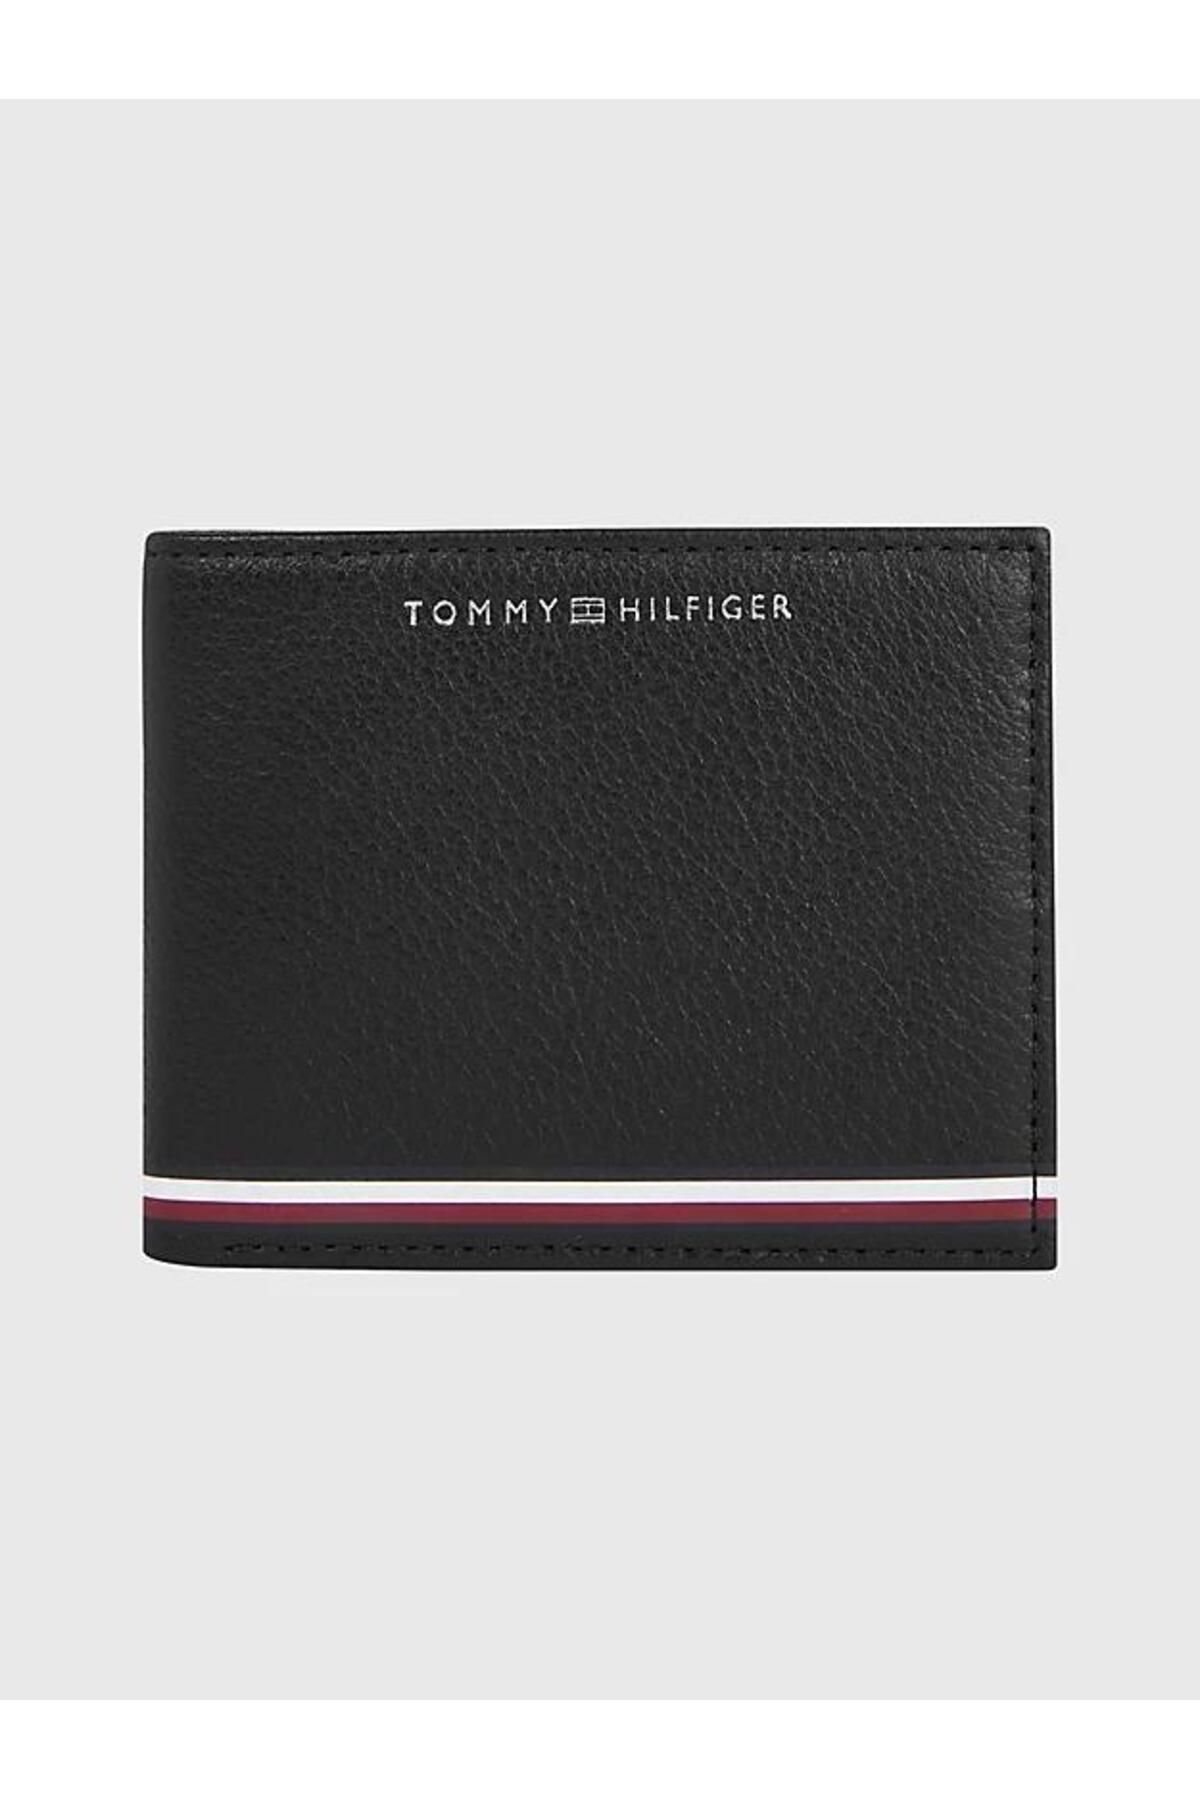 Tommy Hilfiger Th Central Mini Cc Wallet